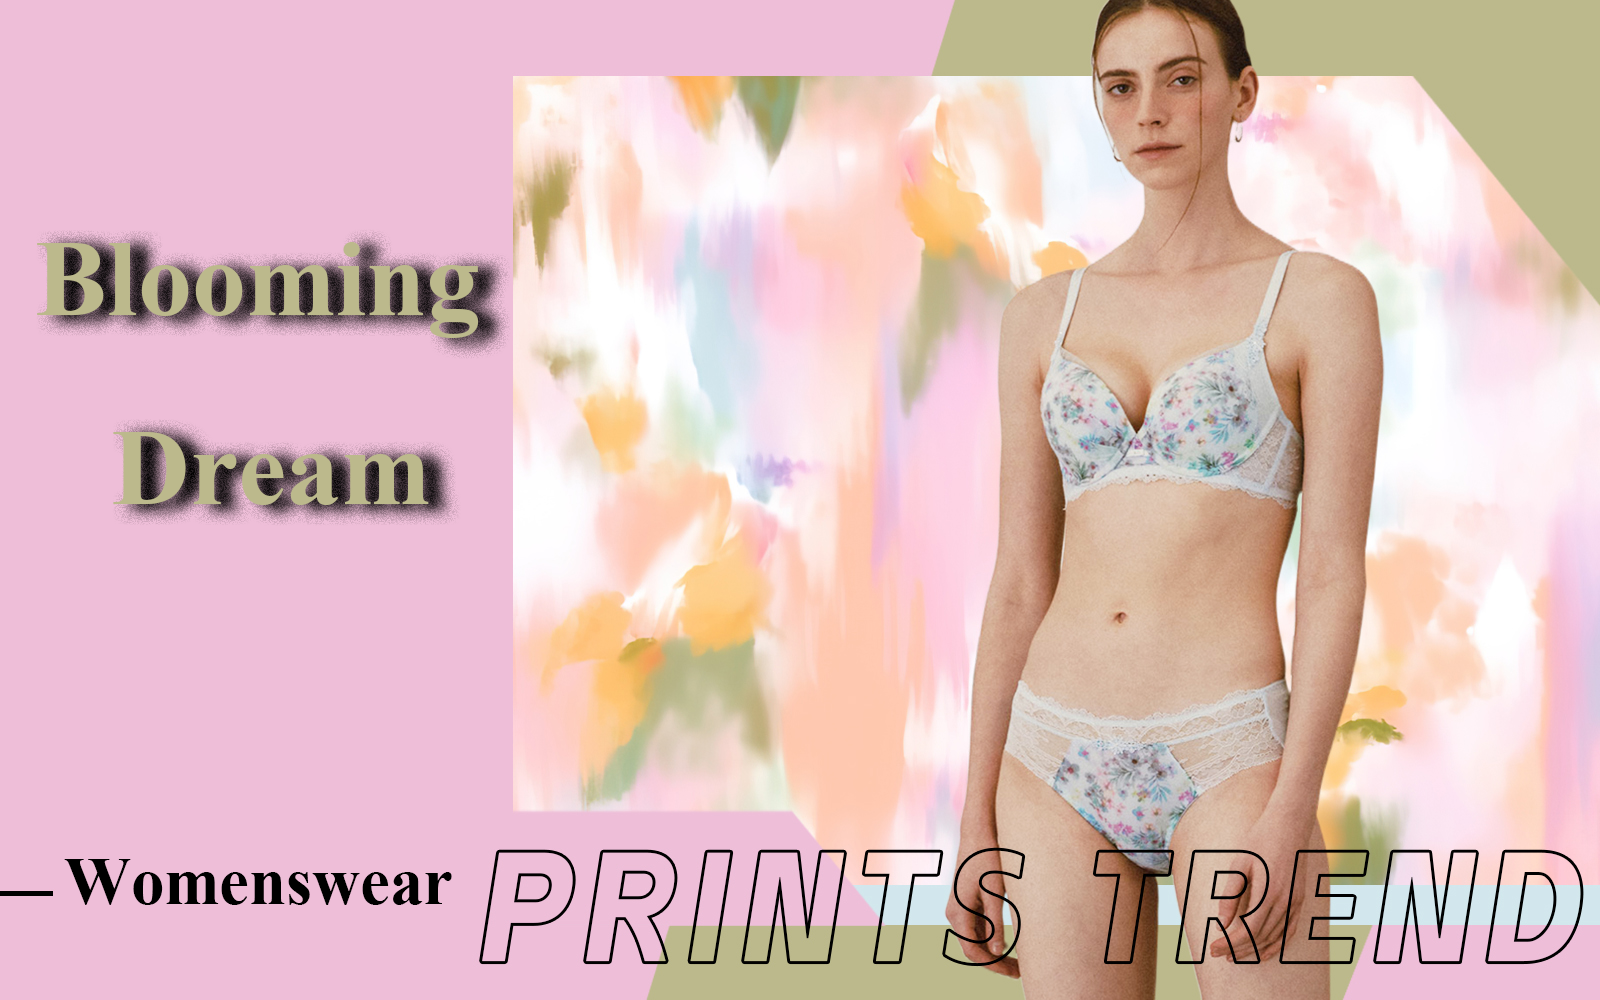 Blooming Dream -- The Pattern Trend for Women's Panties